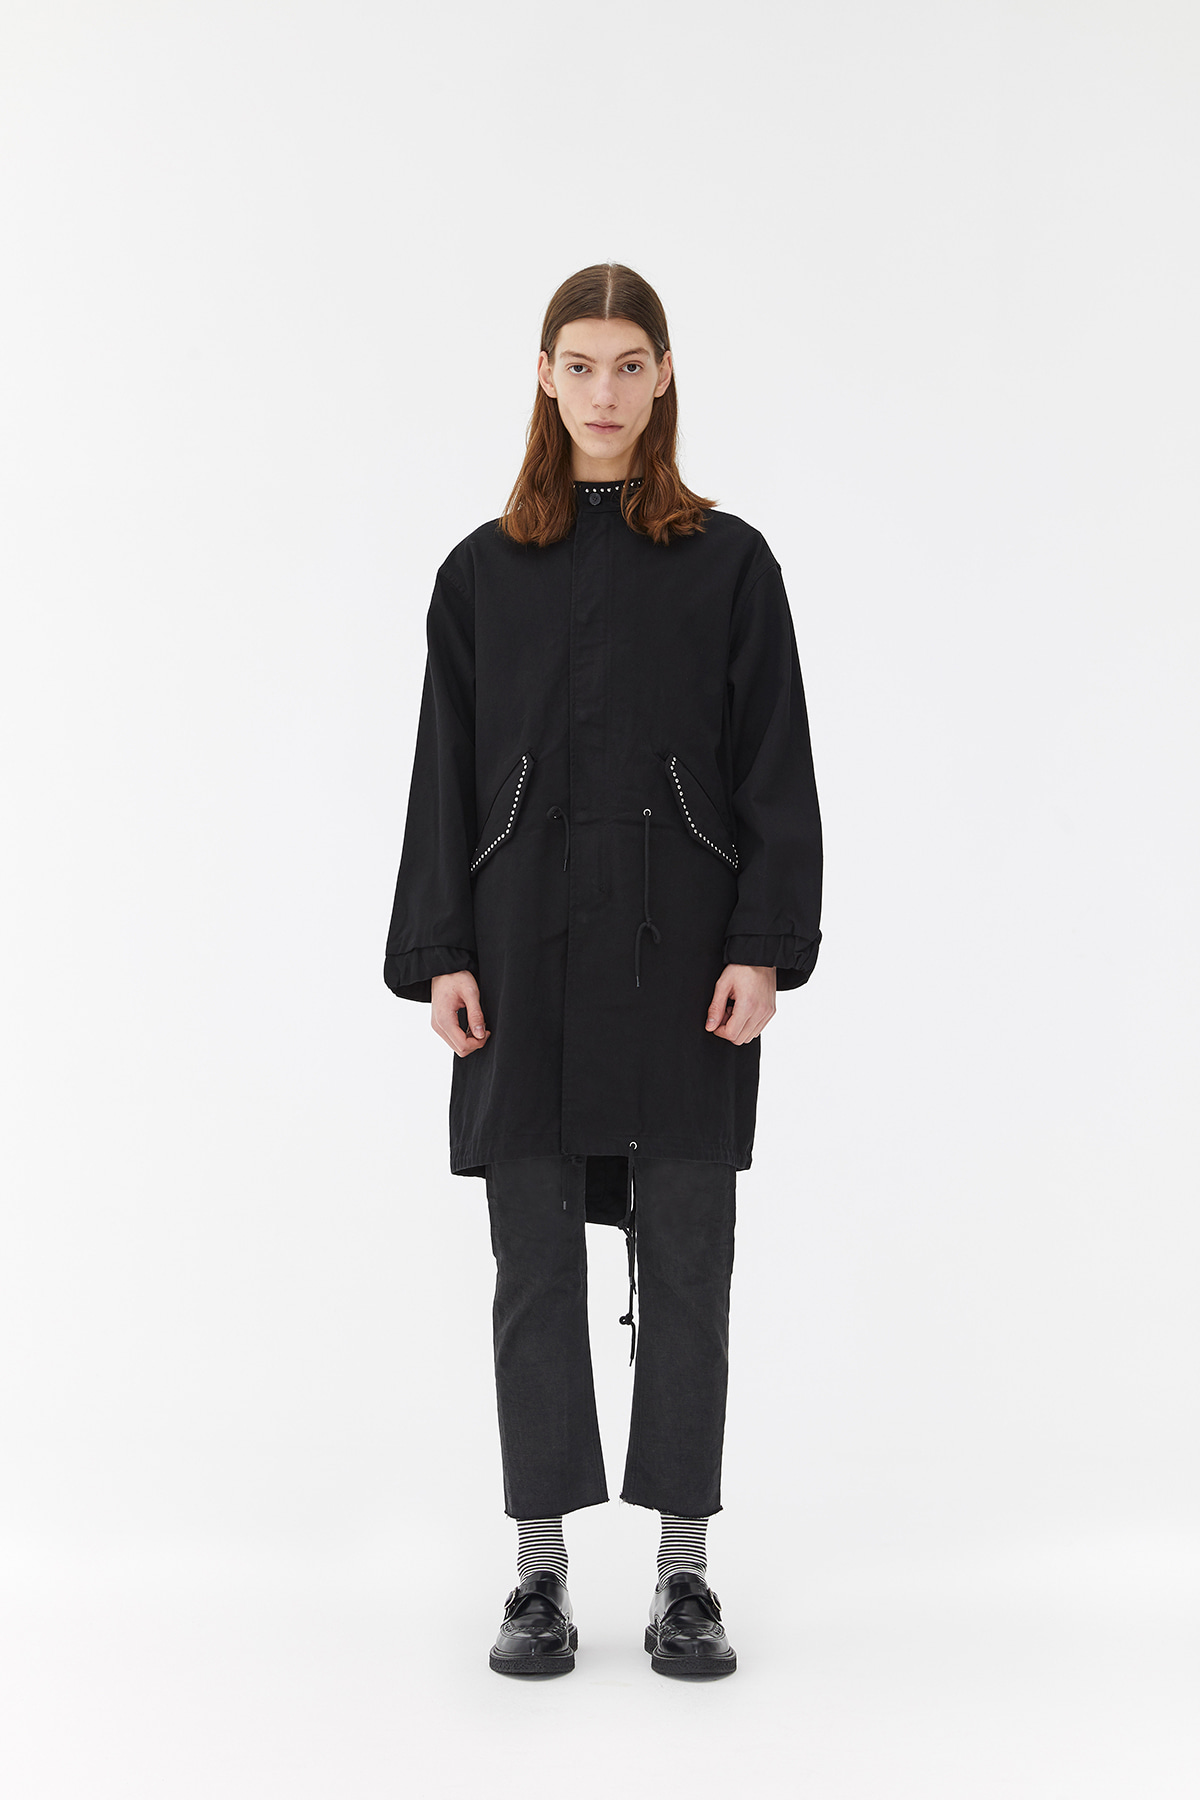 UNKNOWN PLEASURES EMBROIDERED STUDS MODS PARKA IN COTTON TWILL BLACK